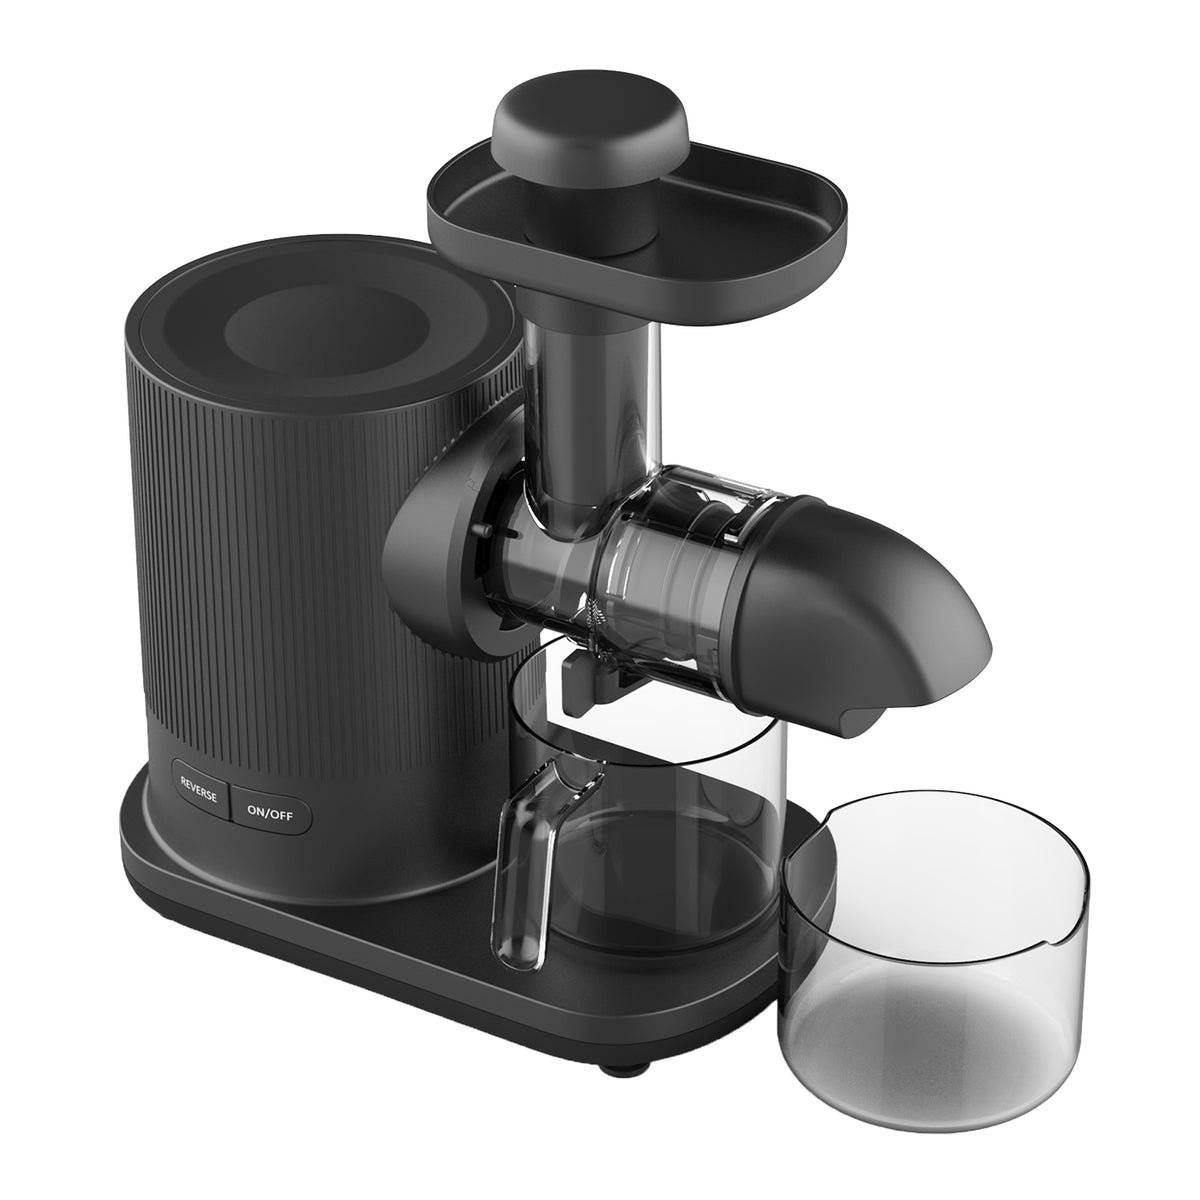 Top view of the Cold Press Slow Juicer with 500ml juice & pulp containers.